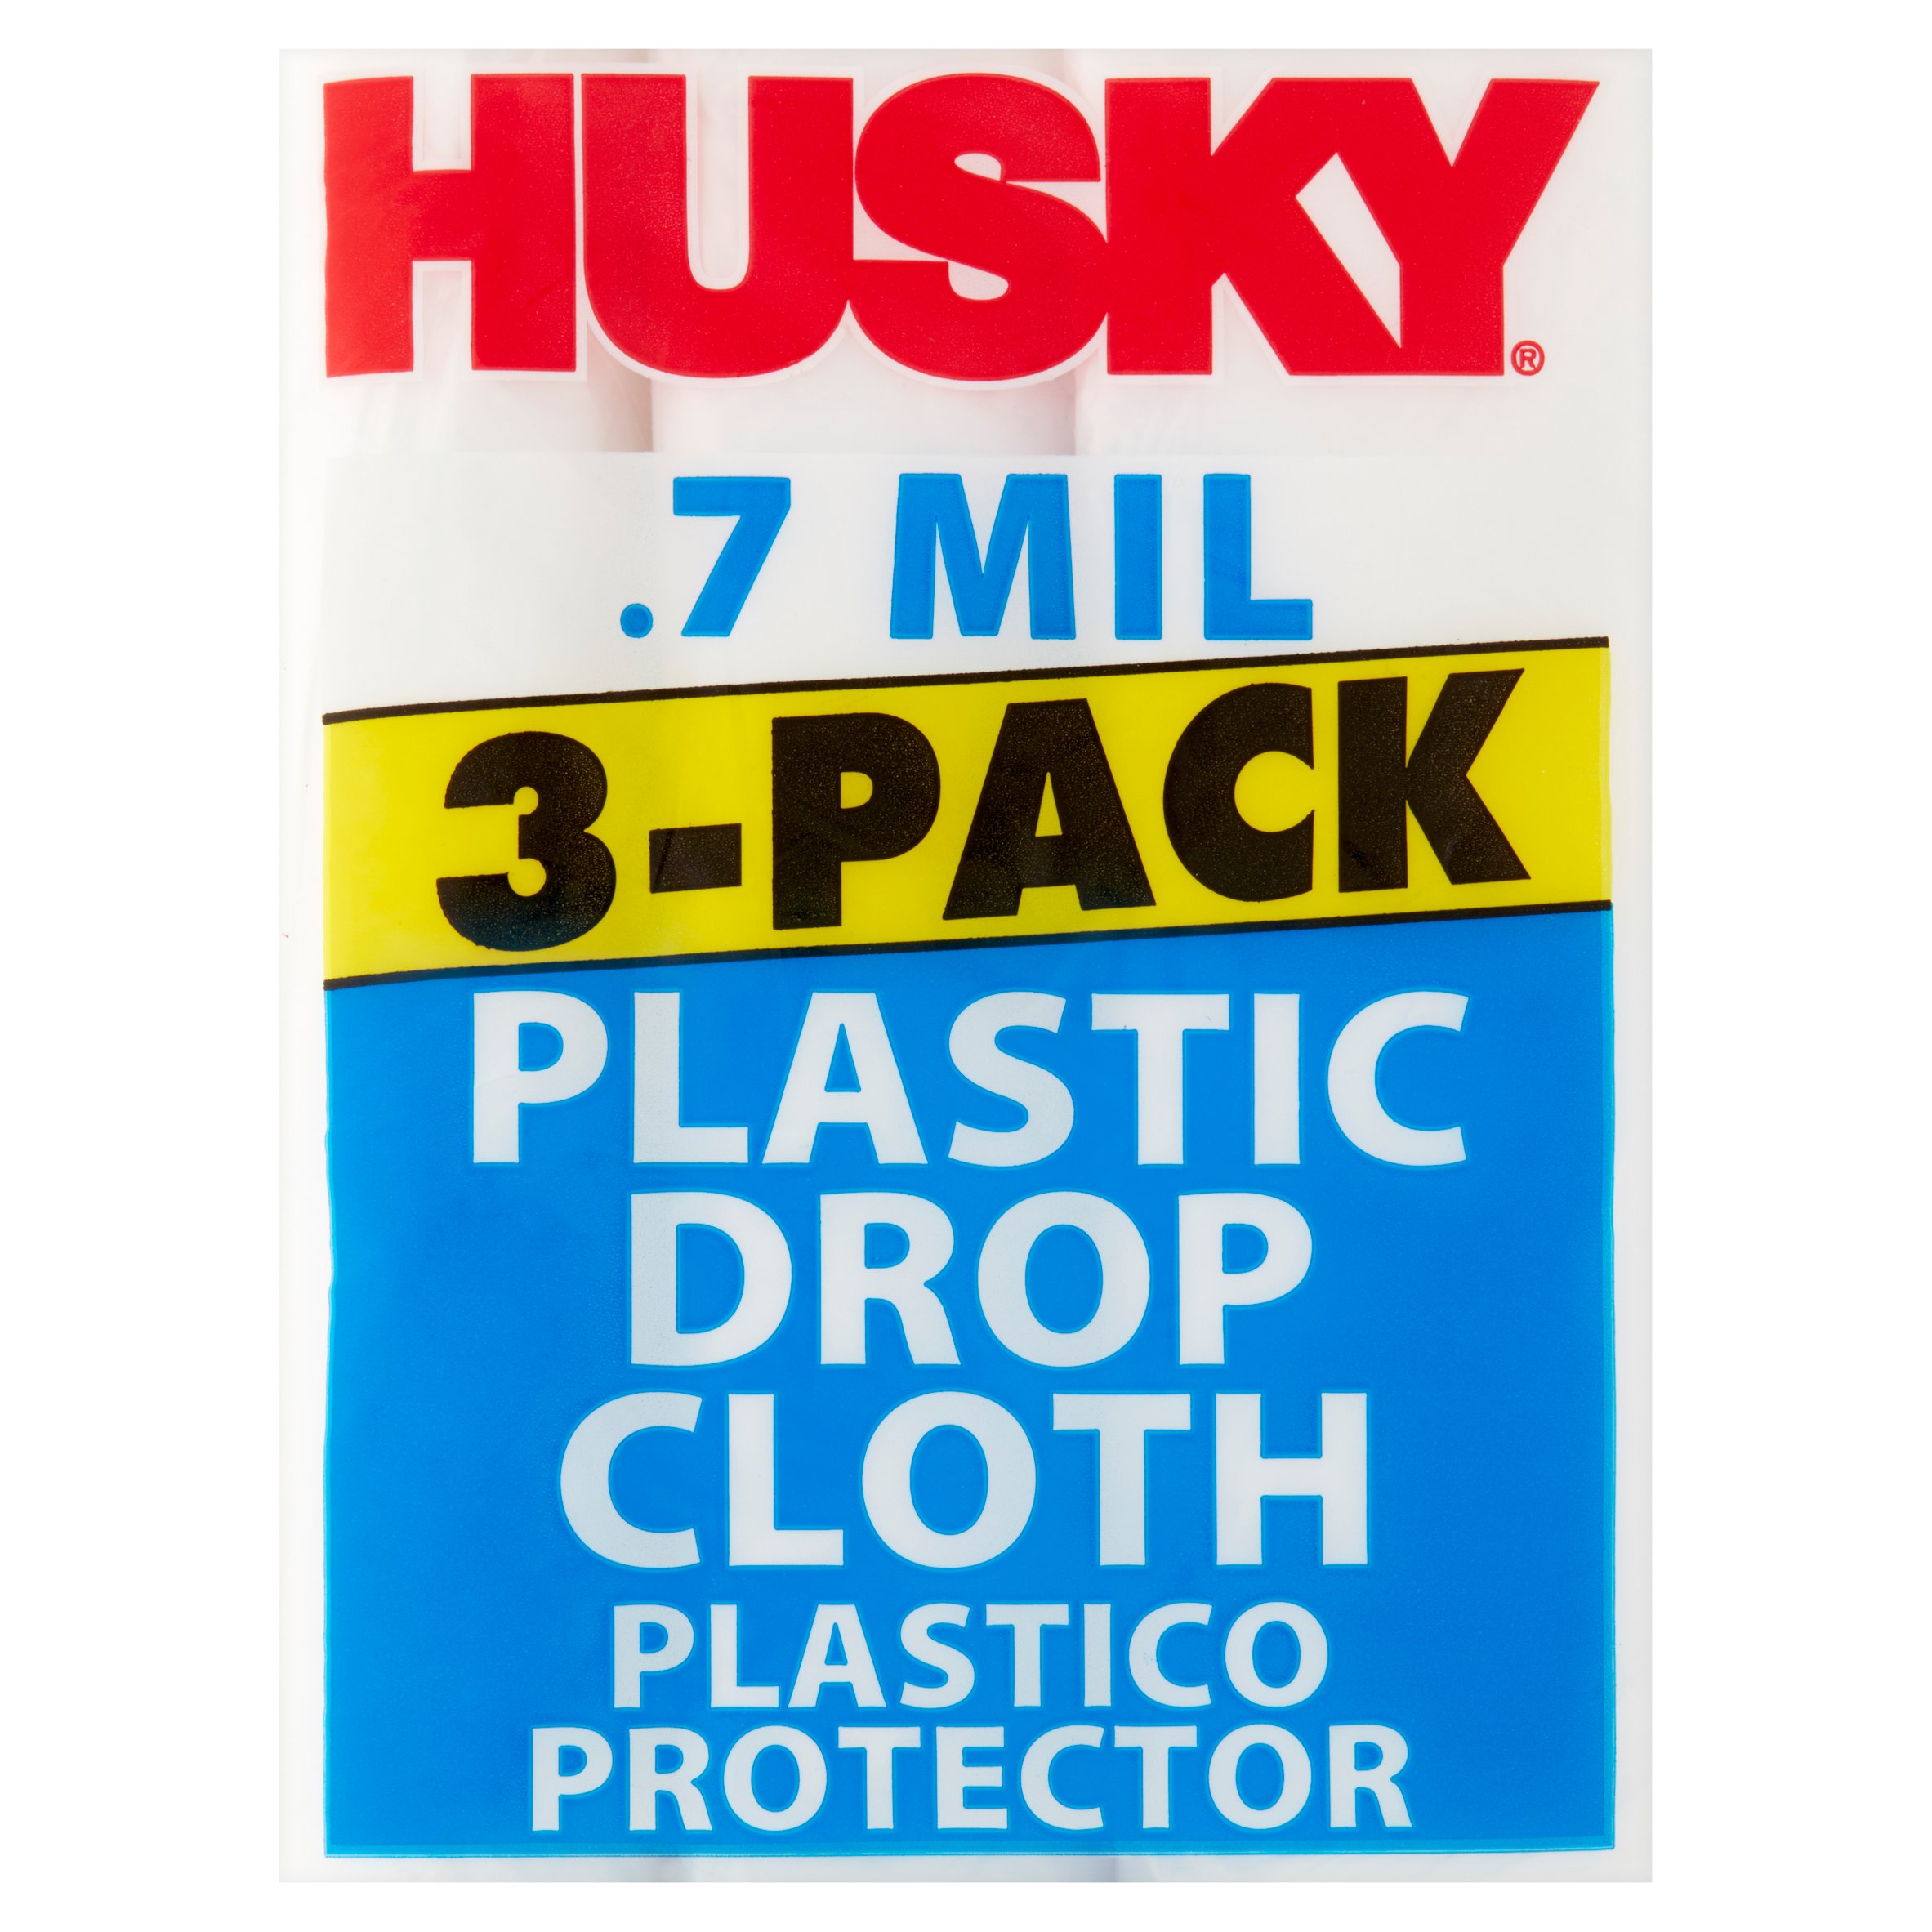 Husky Clear Plastic Drop Cloth, 0.7 Mil, 9 Ft x 12 Ft, 3 Pack - image 4 of 9